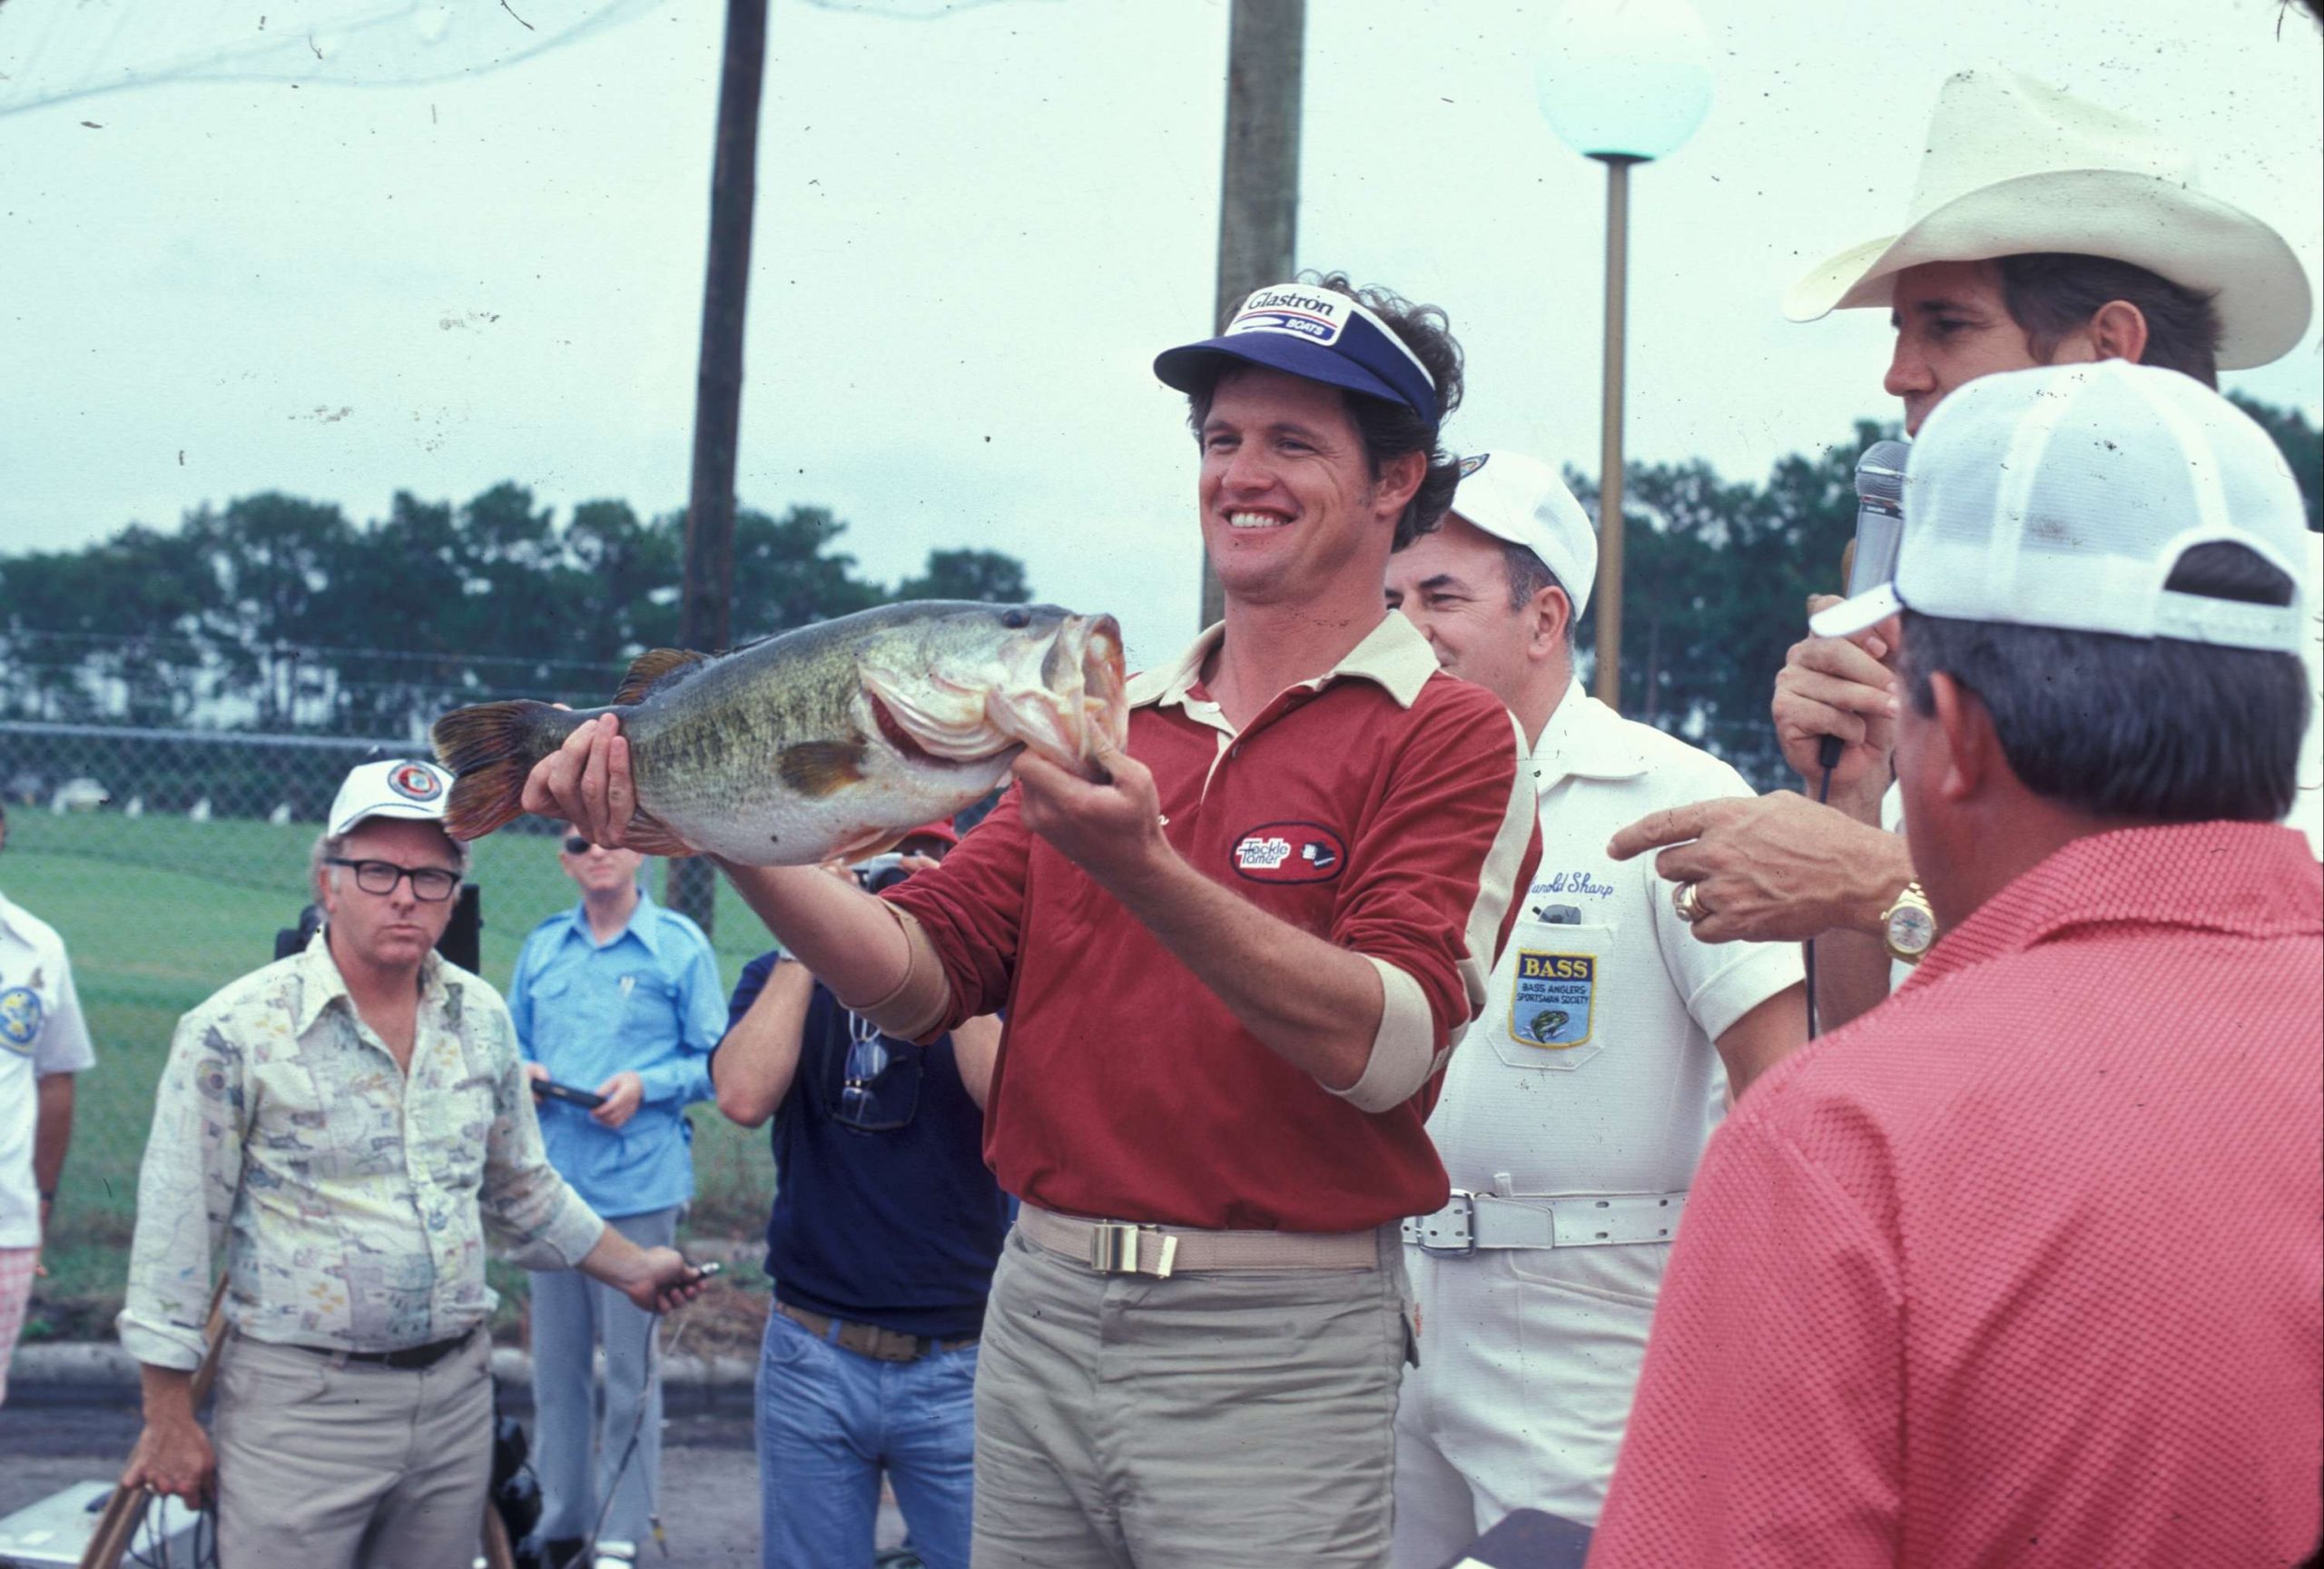 In 1977 Clunn collected two tournament Top 5s and ended up winning the Bassmaster Classic again.